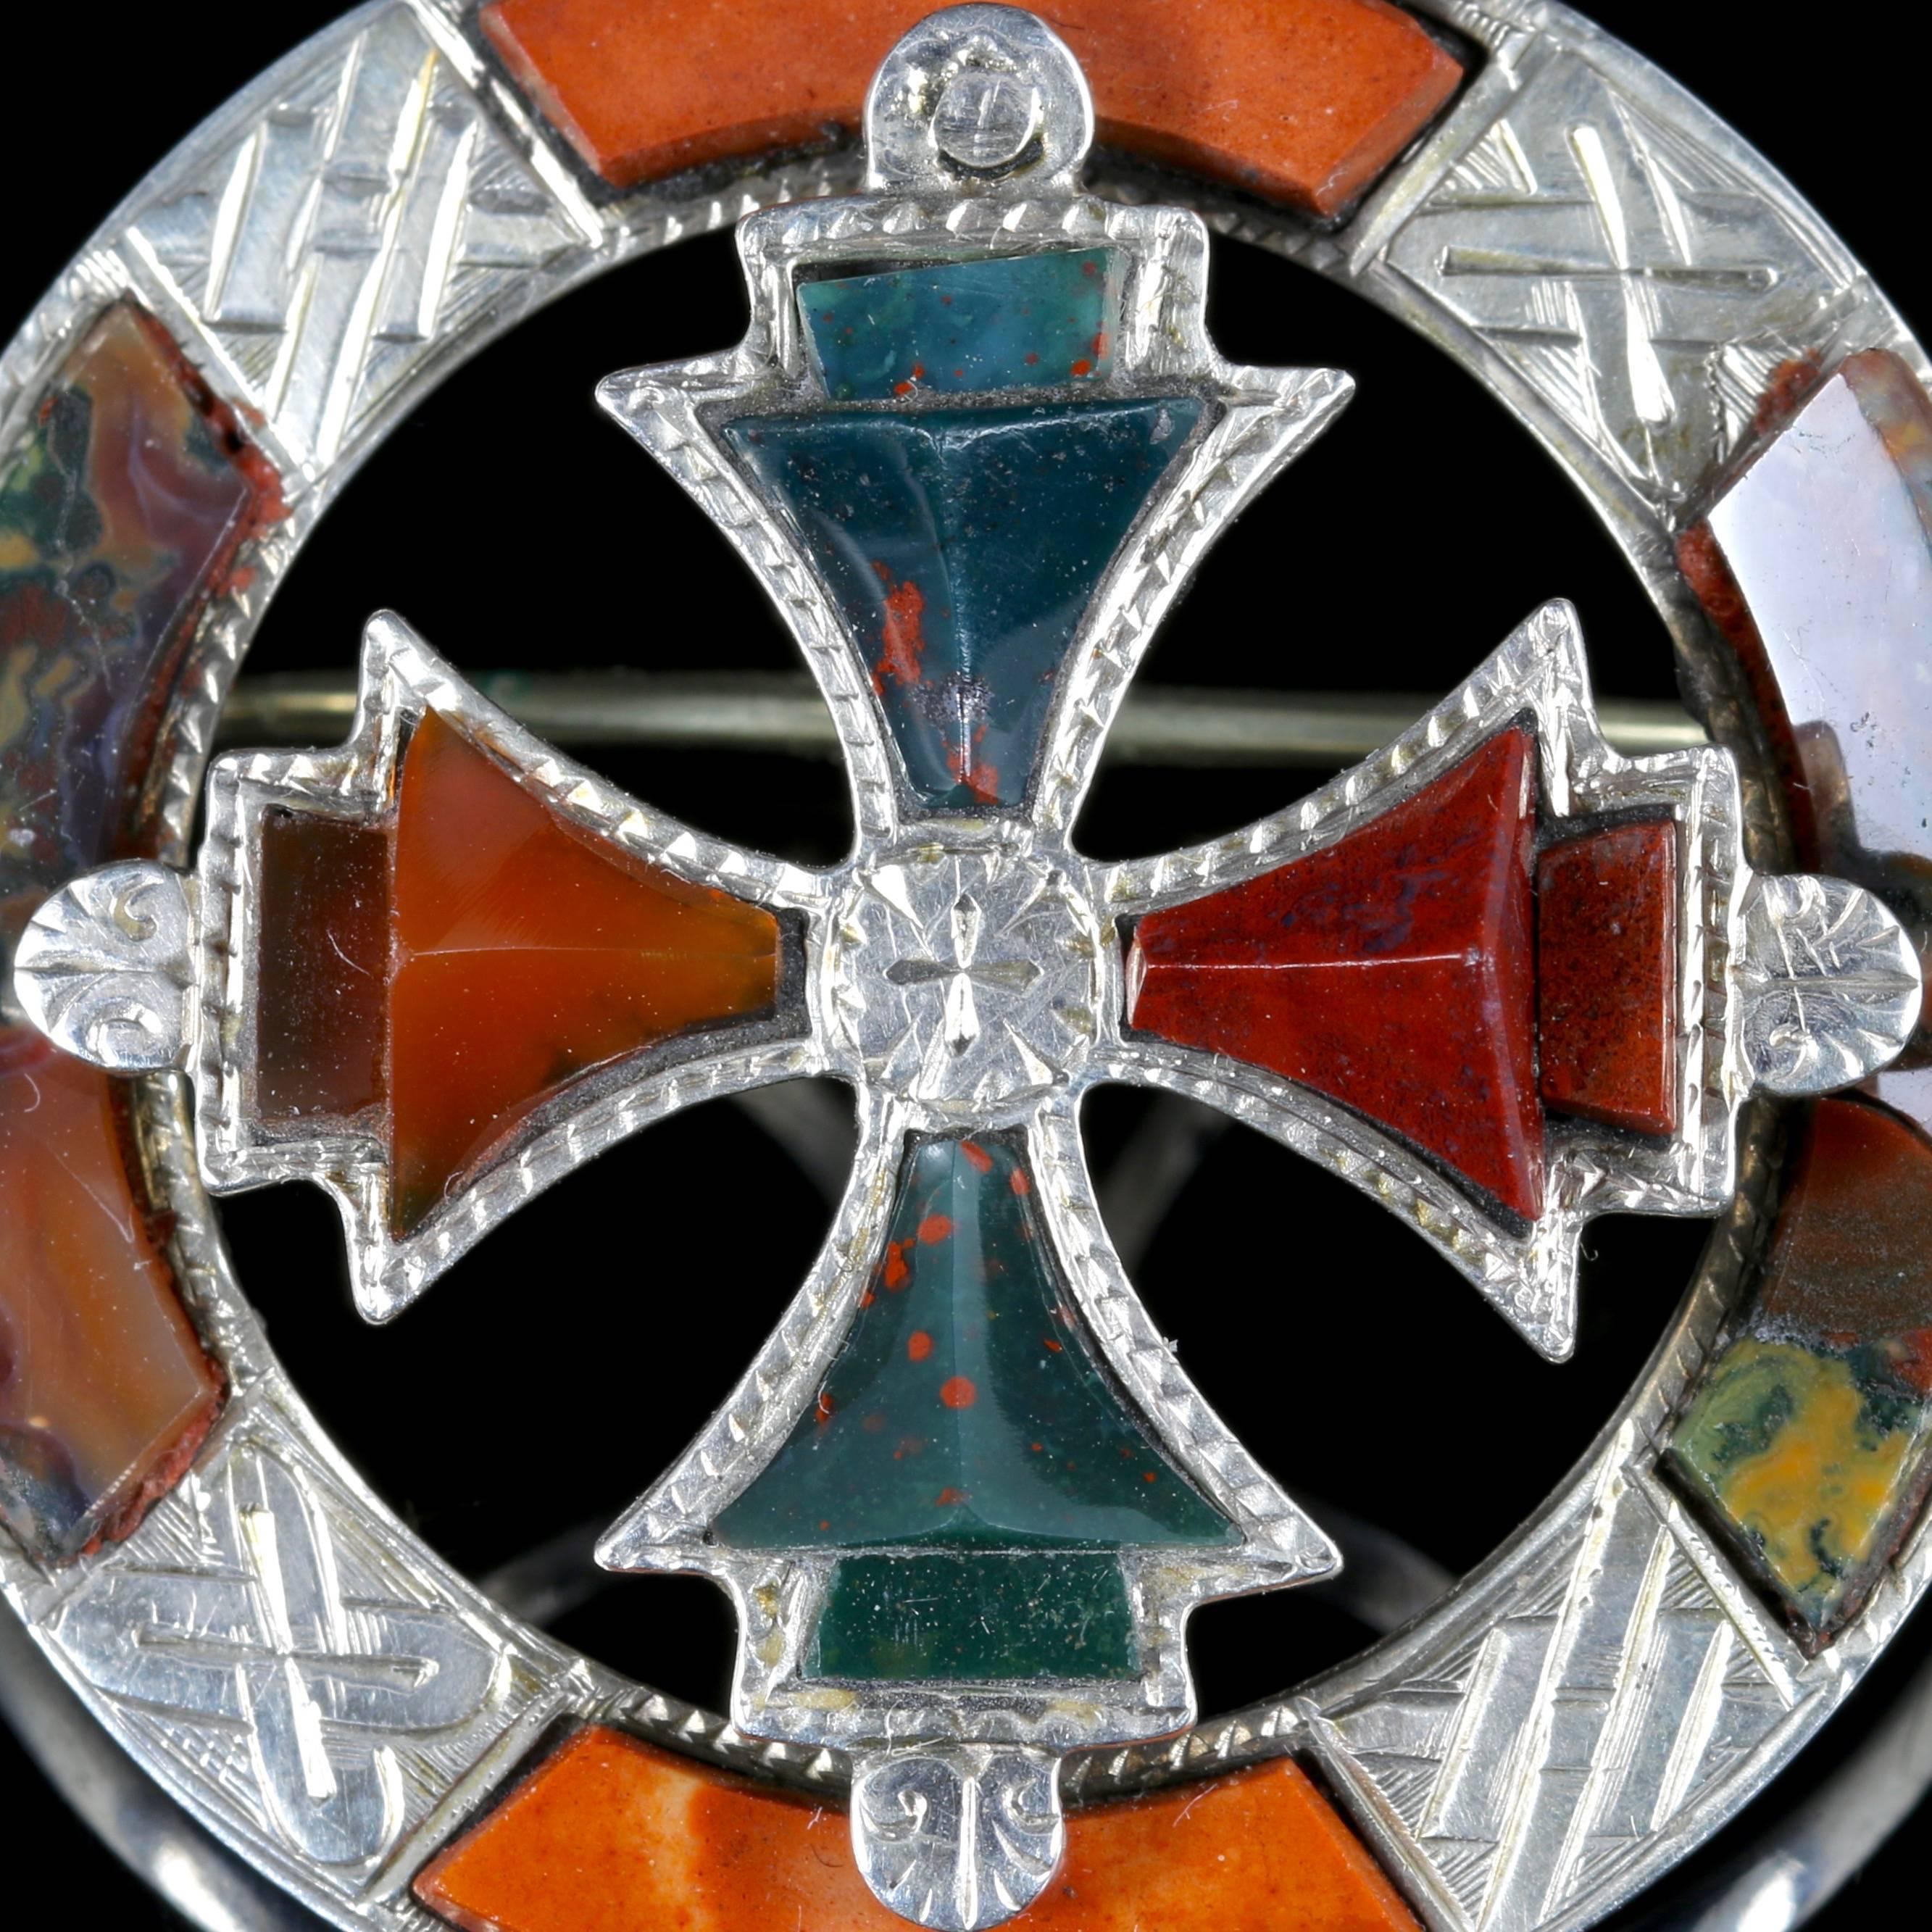 This is a fabulous Victorian large Scottish Silver Agate brooch.

Circa 1860.

Set with a large Celtic Agate cross in the centre.

Scottish jewellery was made popular by Queen Victoria as it became a souvenir of her trips to Scotland. 

From the mid